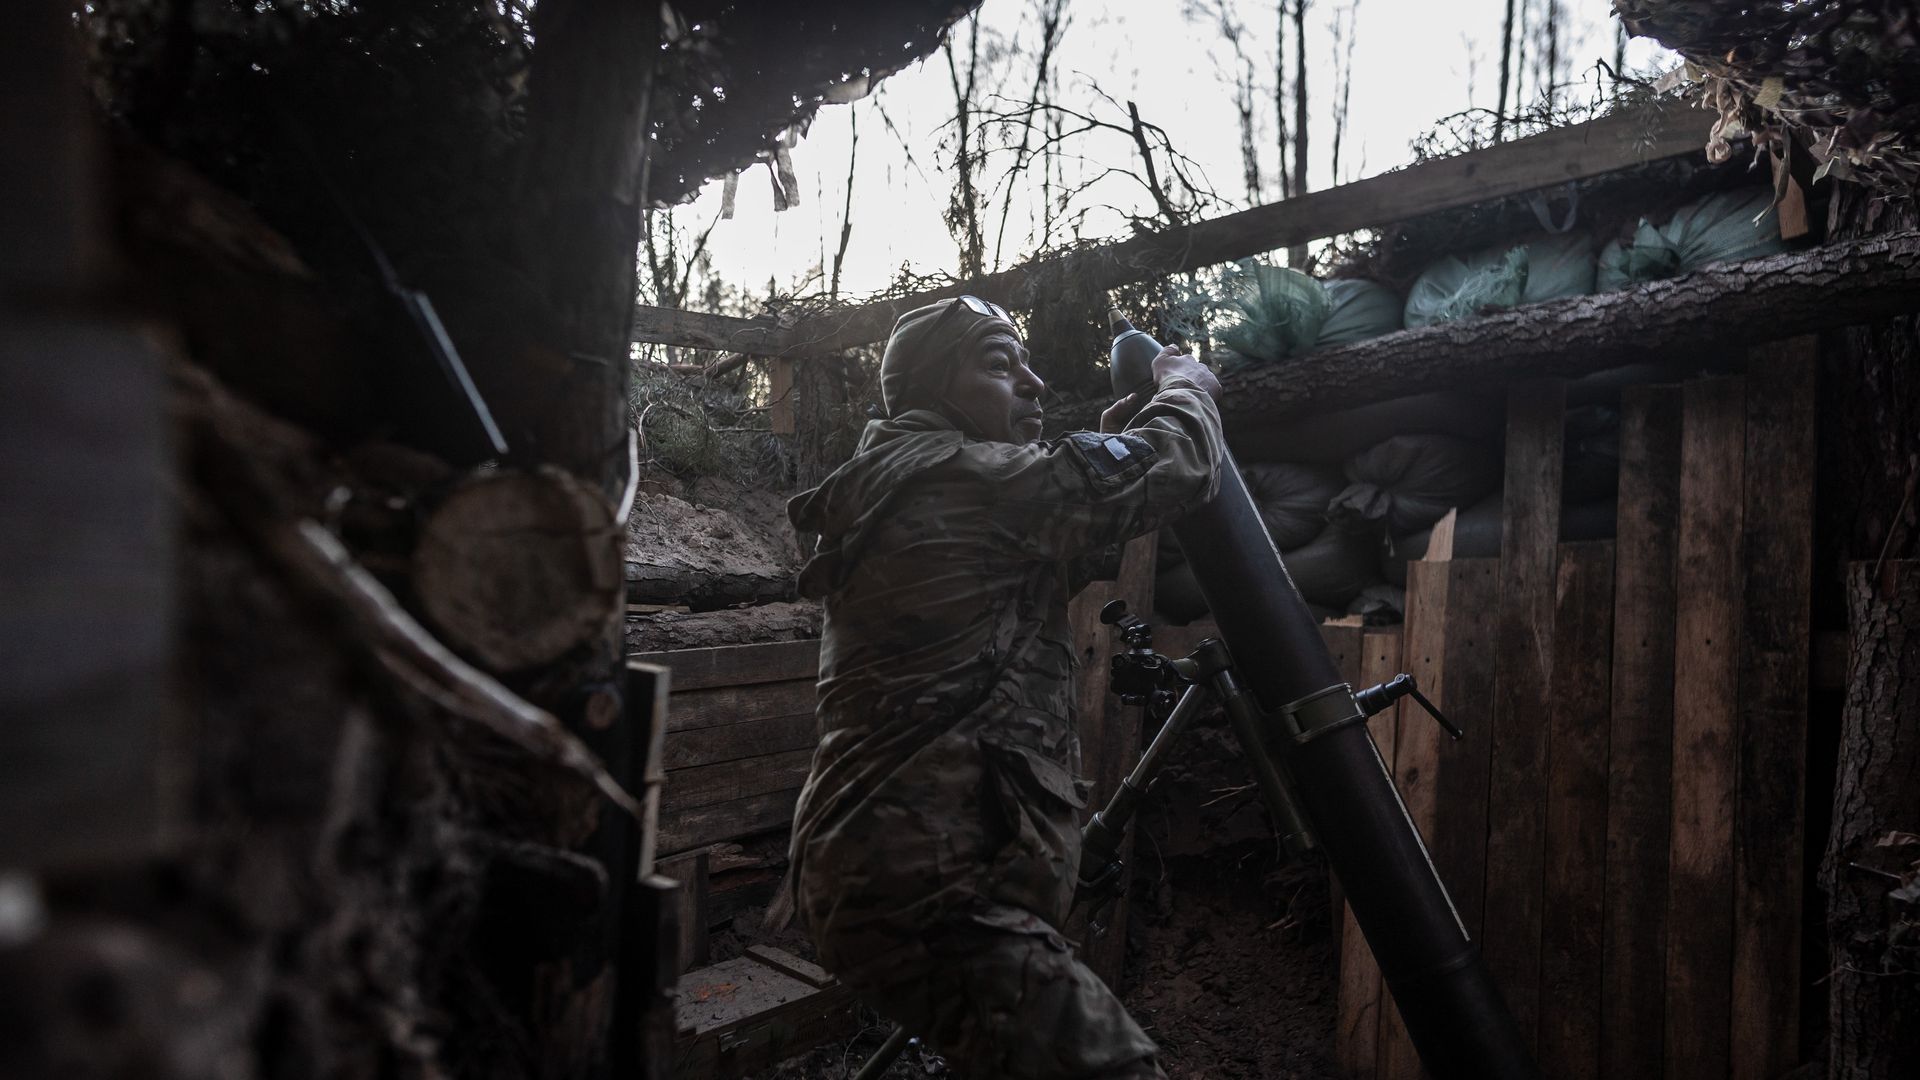 Ukrainian solider in foxhole with mortar